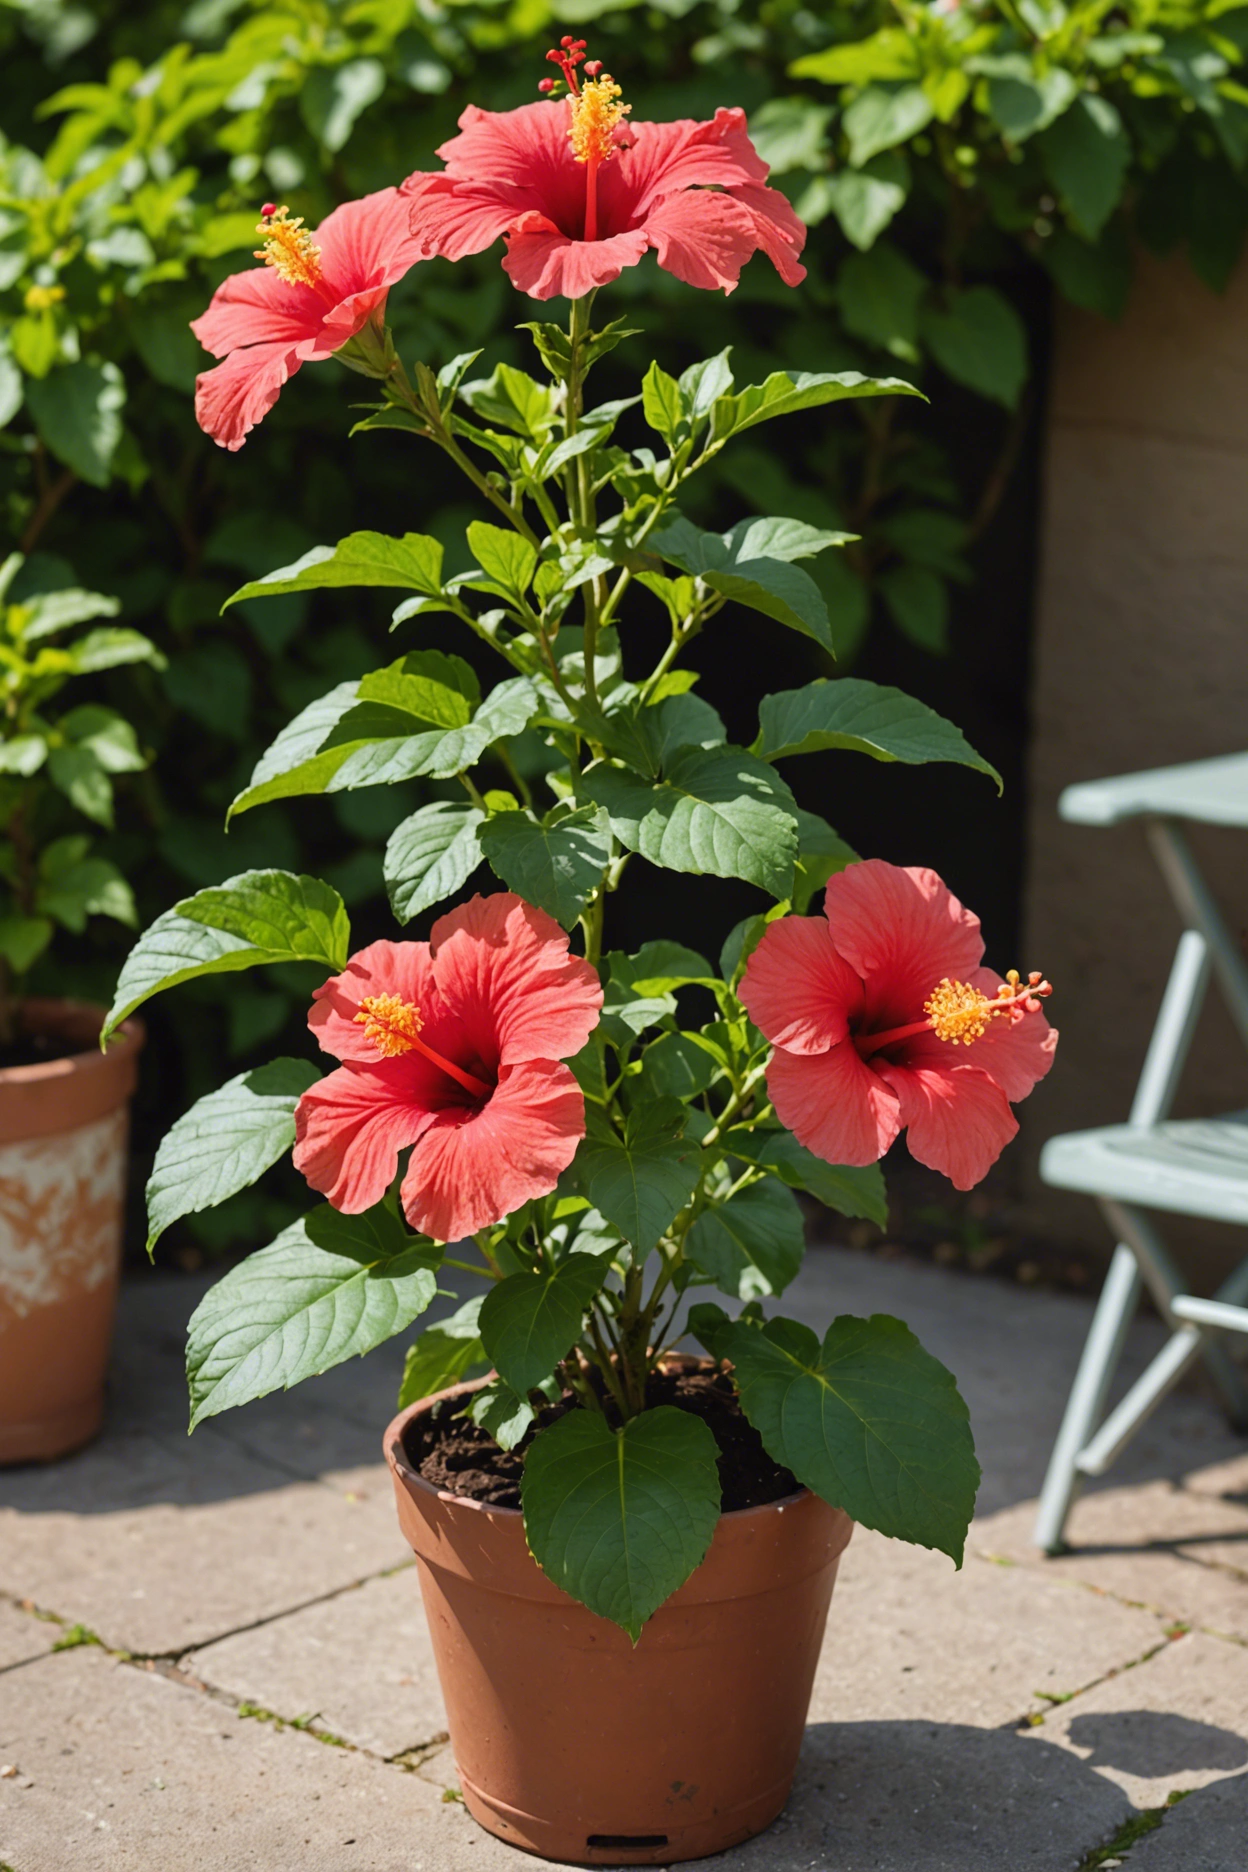 "A hibiscus plant with lush green leaves but no flowers in a sunny outdoor setting, with a bottle of fertilizer and pruning shears nearby."